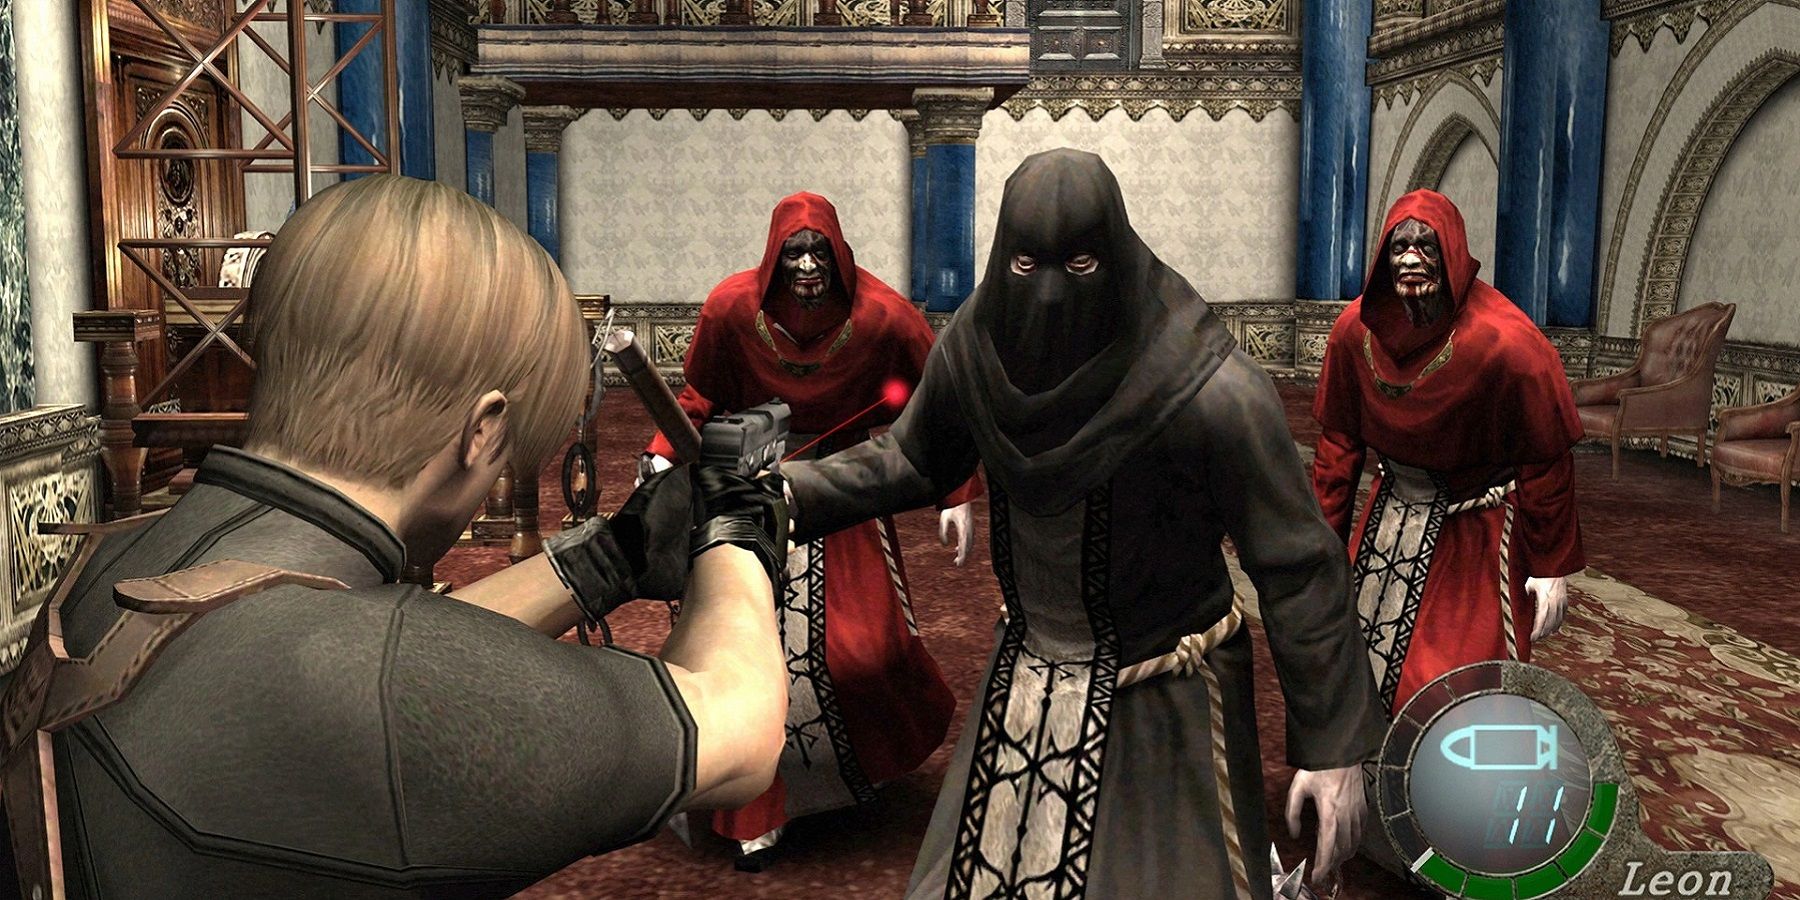 Screenshot from Resident Evil 4 showing Leon Kennedy about to show a group of Castle Ganado enemies.